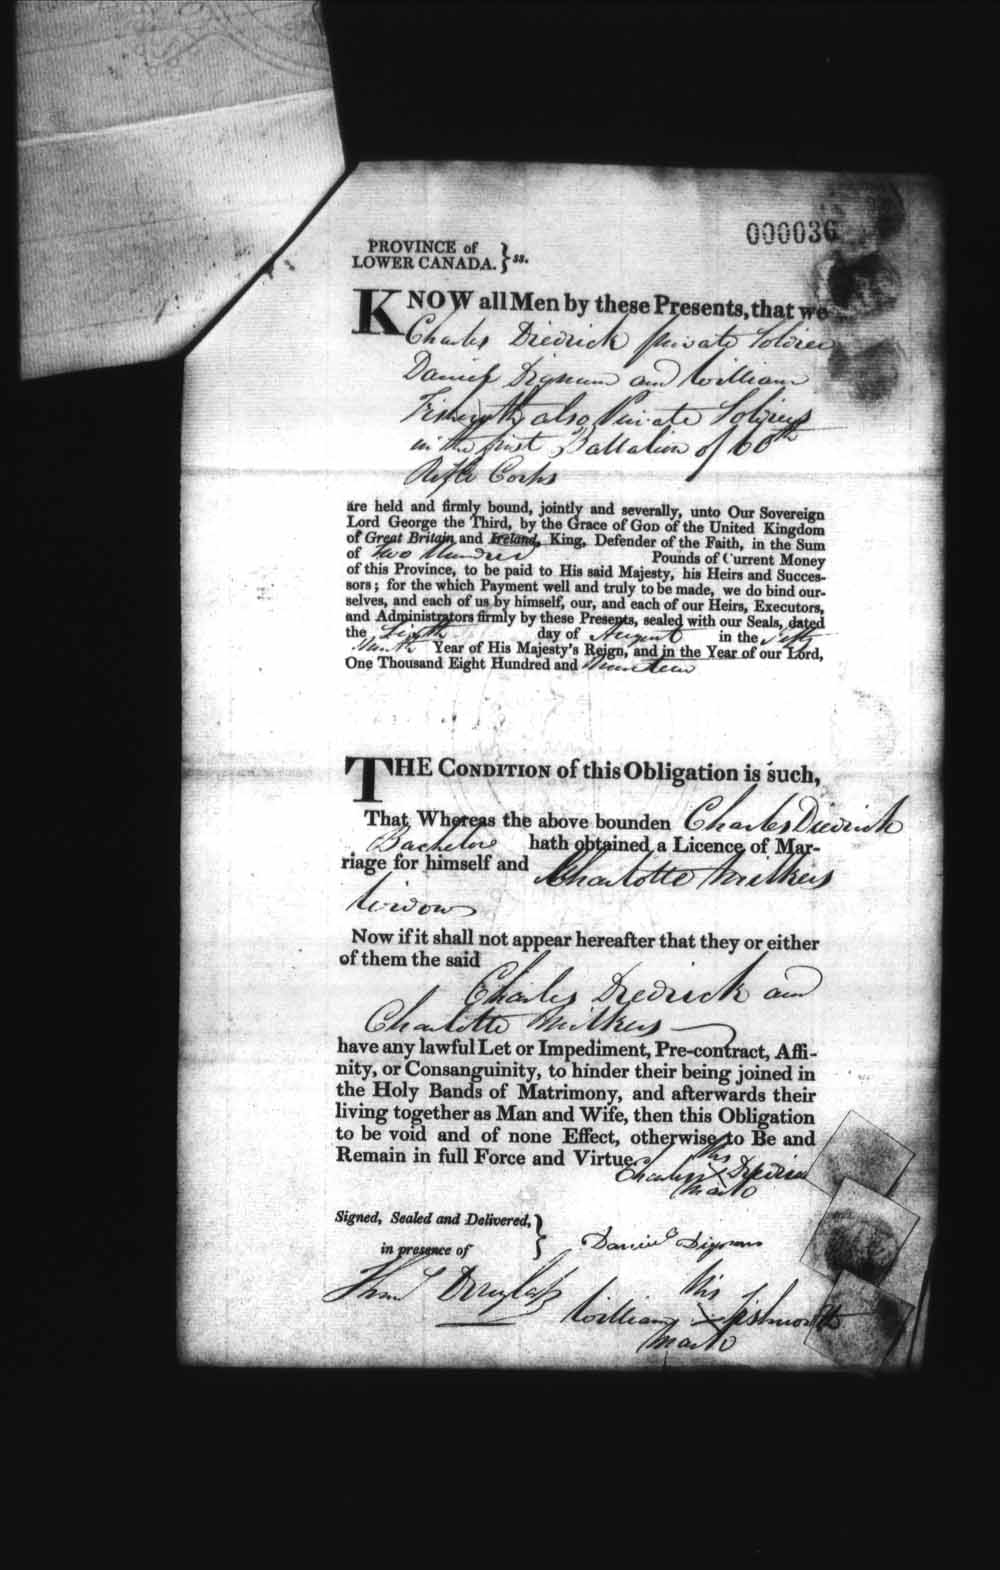 Digitized page of Upper and Lower Canada Marriage Bonds (1779-1865) for Image No.: e008235854